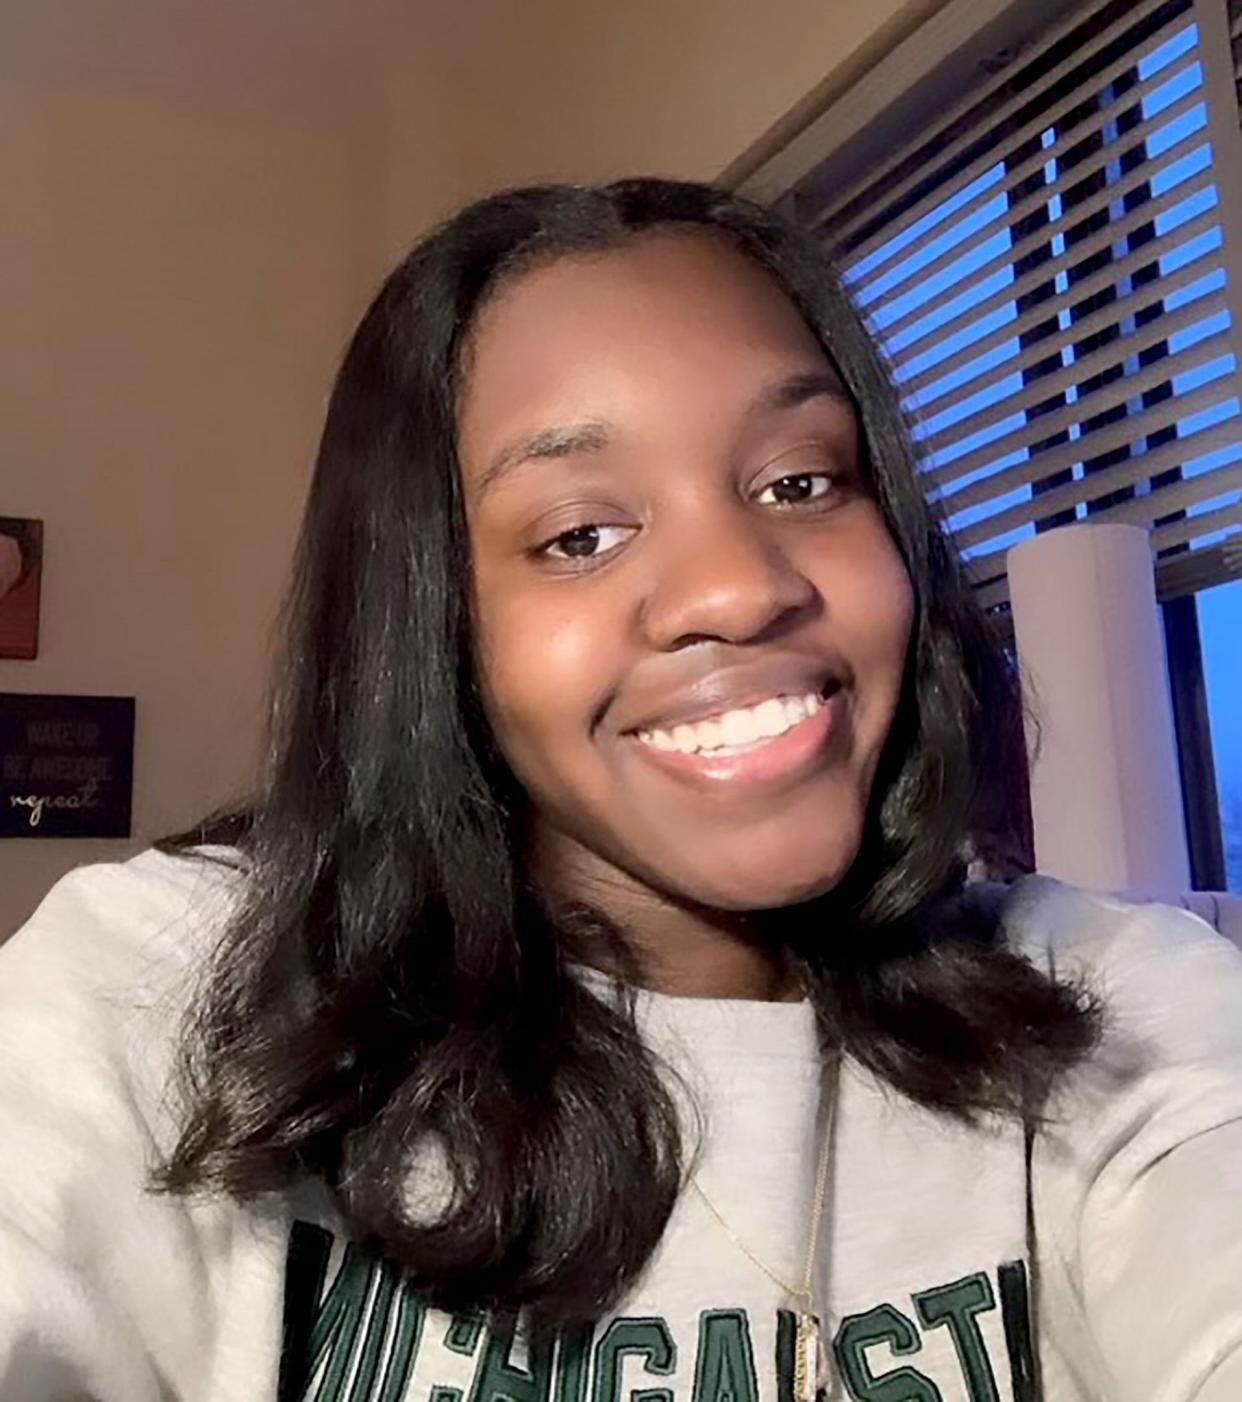 Arielle Anderson, of Harper Woods, Mich. is one of the three victims of Monday night's mass shooting at Michigan State University's campus.